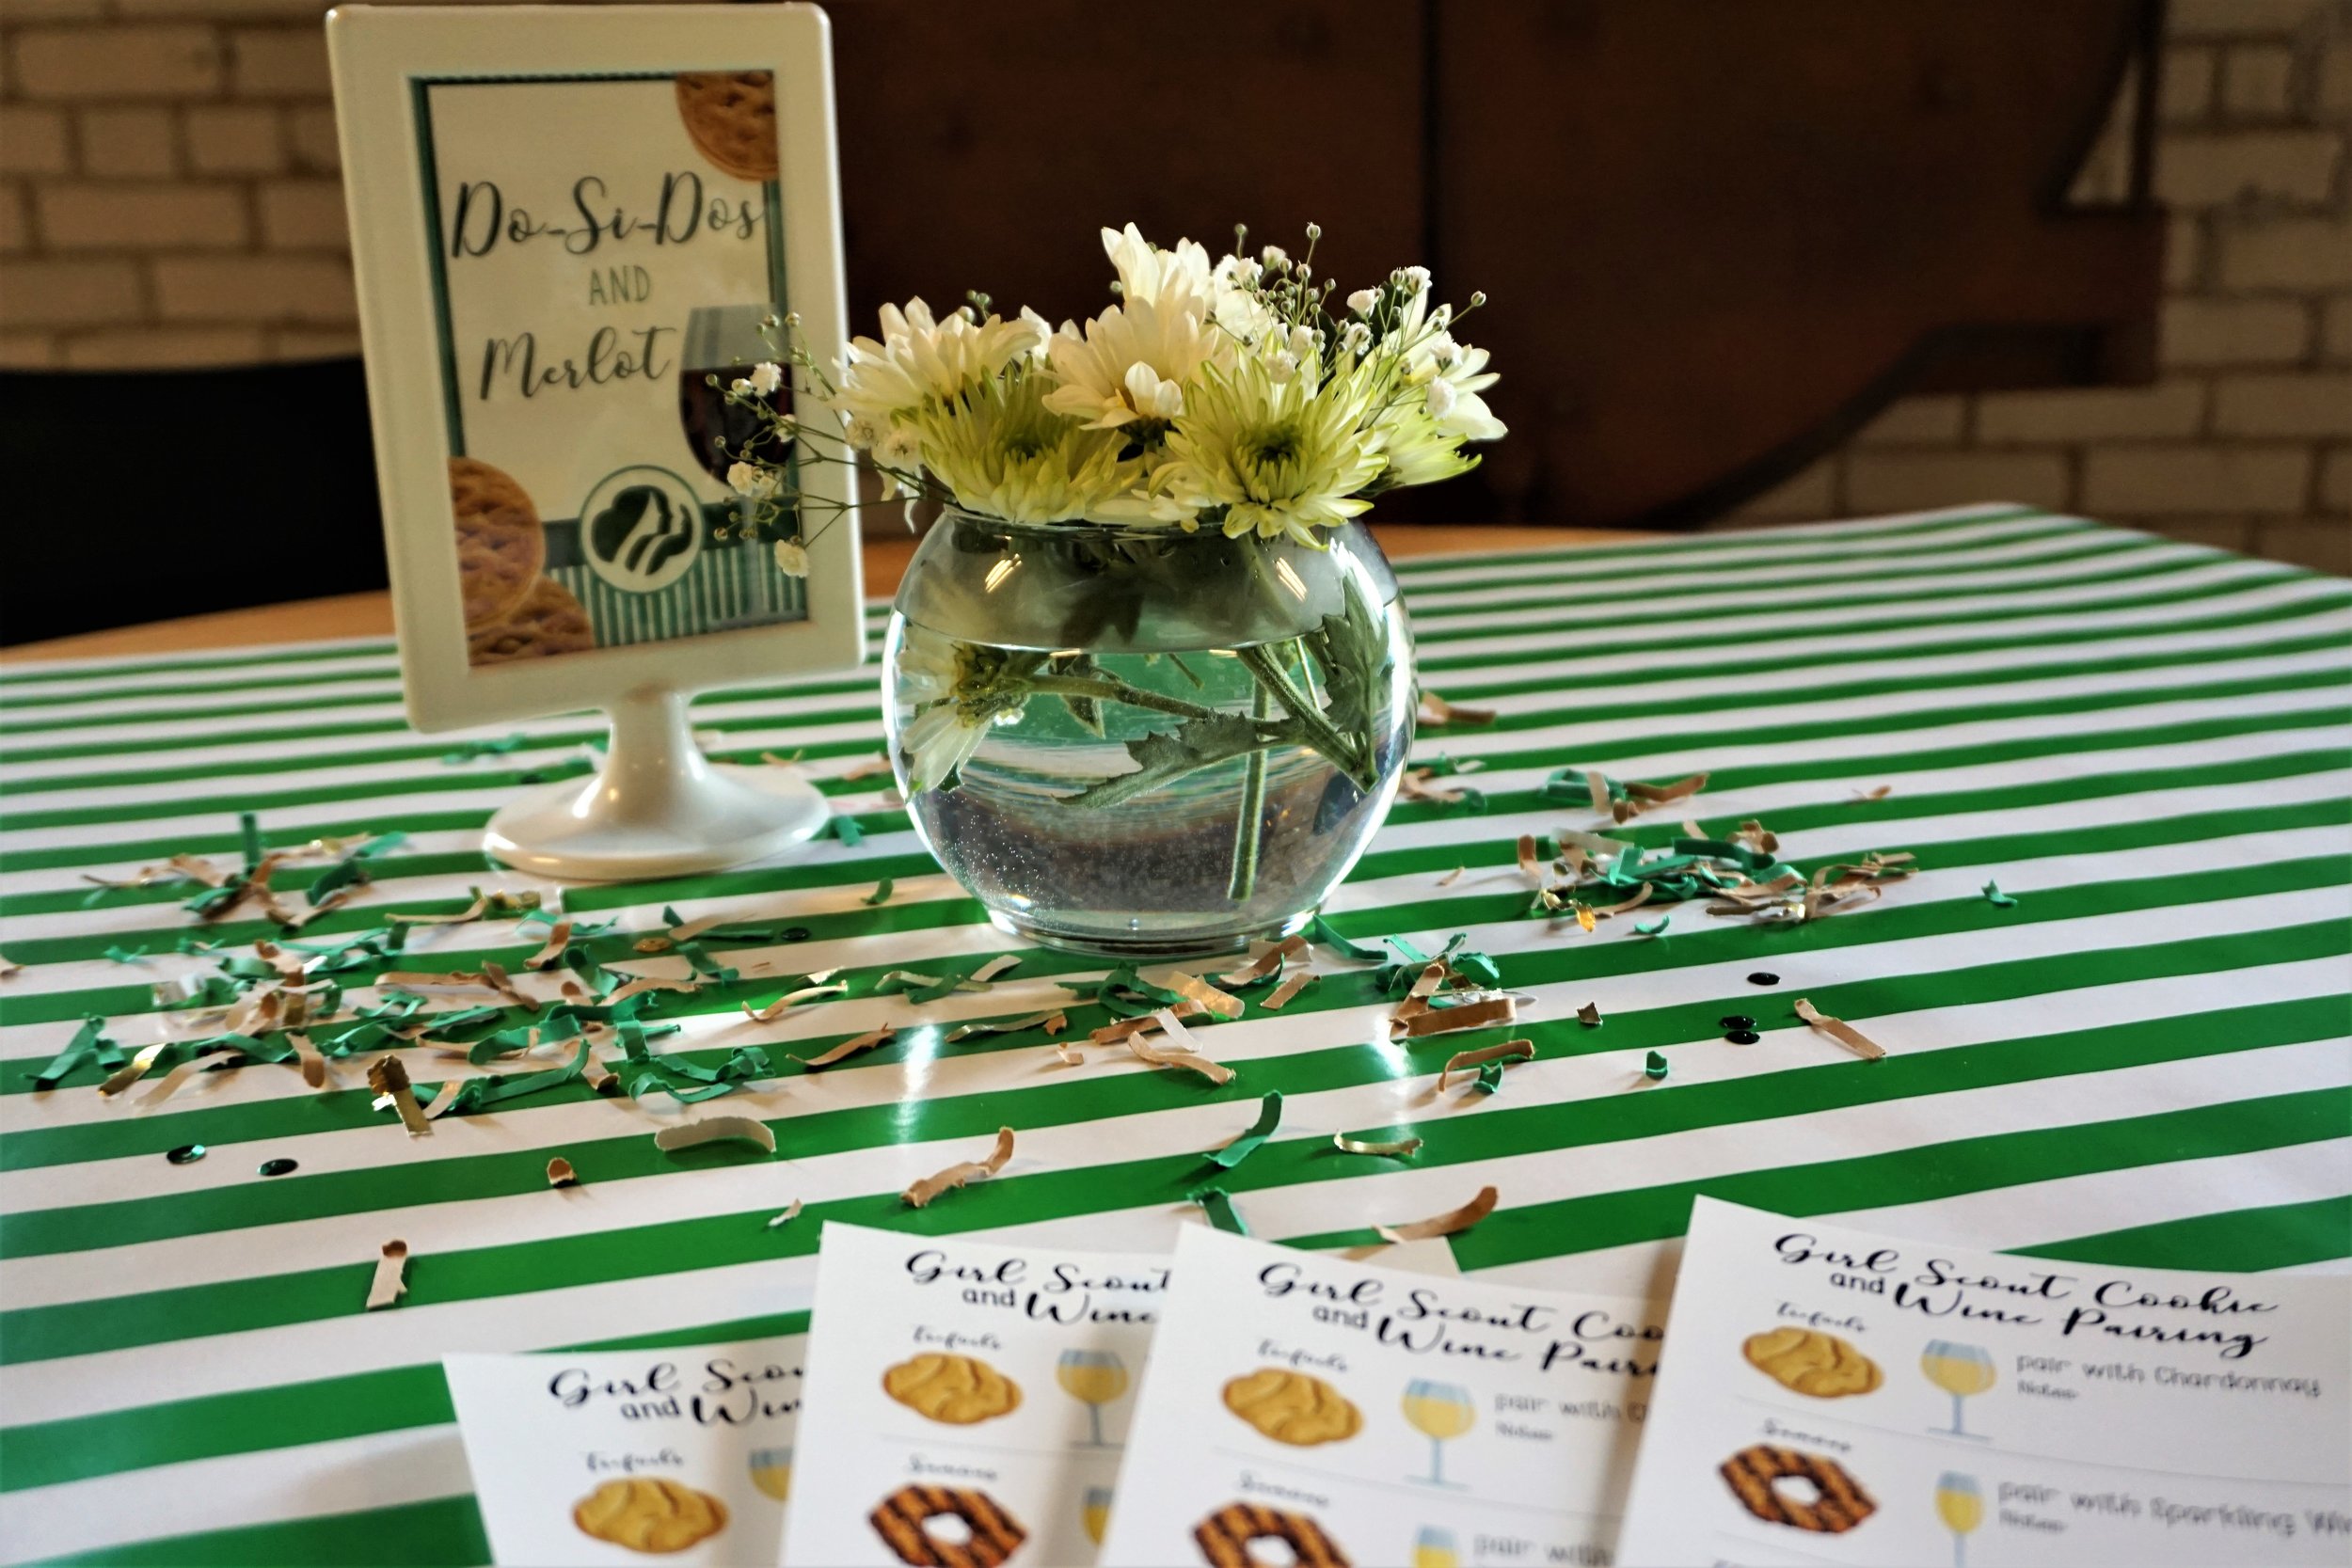  Daisy flower arrangements make the perfect table decor for a Girl Scout themed event. 